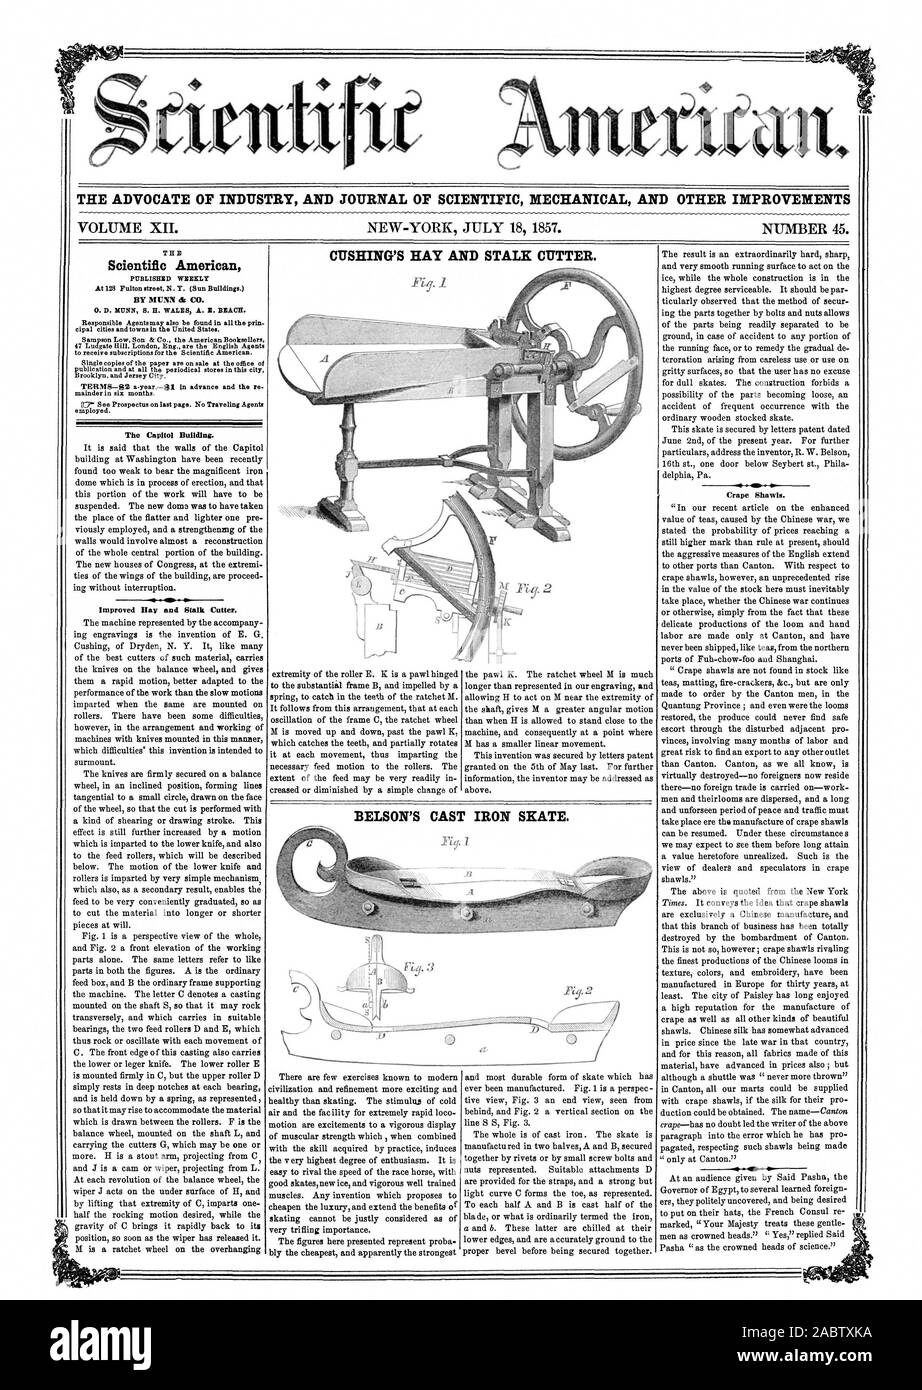 THE ADVOCATE OF INDUSTRY AND JOURNAL OF SCIENTIFIC MECHANICAL AND OTHER IMPROVEMENTS VOLUME XII. NEW-YORK JULY 18 1857. NUMBER 45. CUSHING'S HAY AND STALK CUTTER. T H E Scientific American PUBLISHED WEEKLY At 128 Fulton street N. Y. (Sun Buildings.) BY MUNN it CO. cipal cities and towns in the United States. Sampson Low Son & Co the American Booksellers 47 Ludgate Hill London Eng. are the English Agents to receive subscriptions for the Scientific American. Single copies of the paper are on sale at the office of Brooklyn and Jersey City. mainder in six months. employed. The Capitol Building Stock Photo